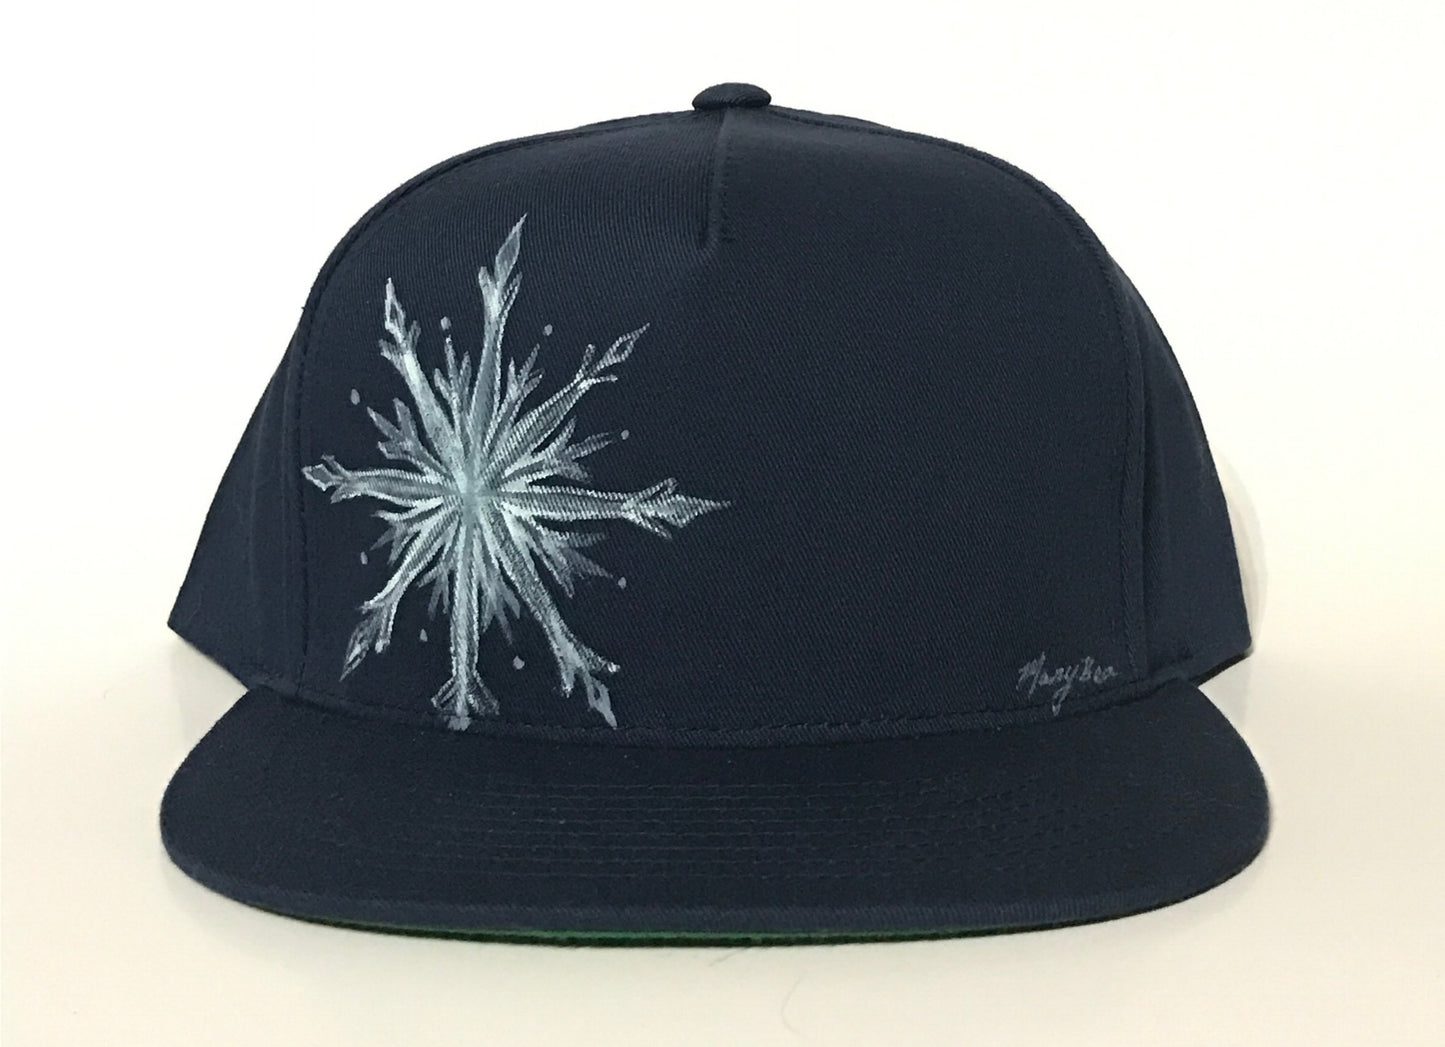 "Snowflake" Hand Painted on Navy Cotton Snapback Hat